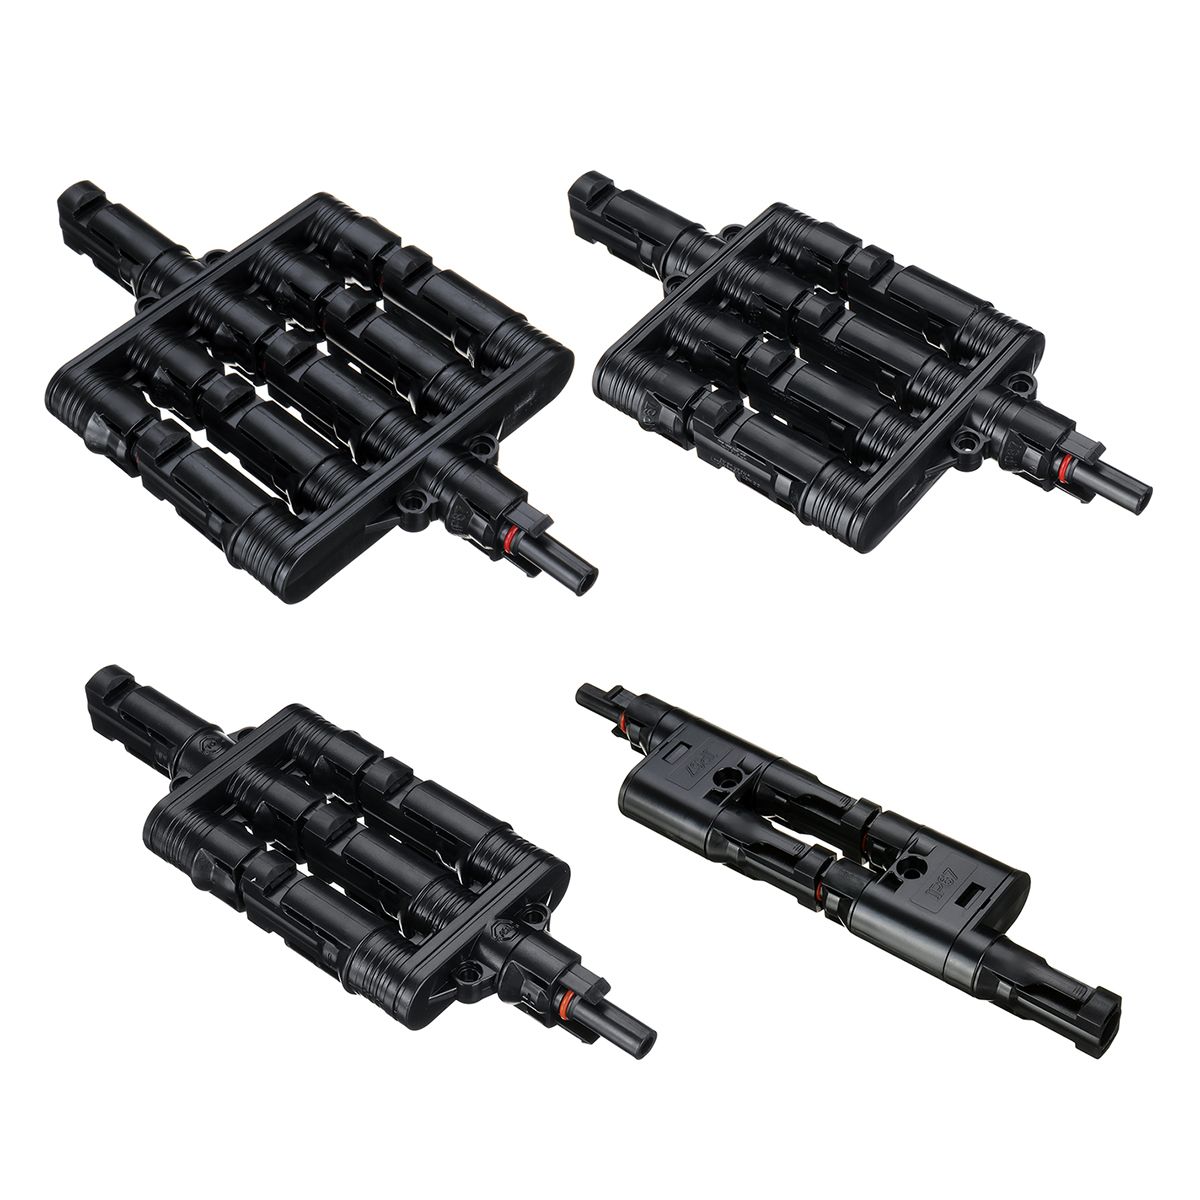 MC4-T-Branch-Solar-Panel-Male-to-Female-Connectors-2345-Branch-Connector-IP65-1572108